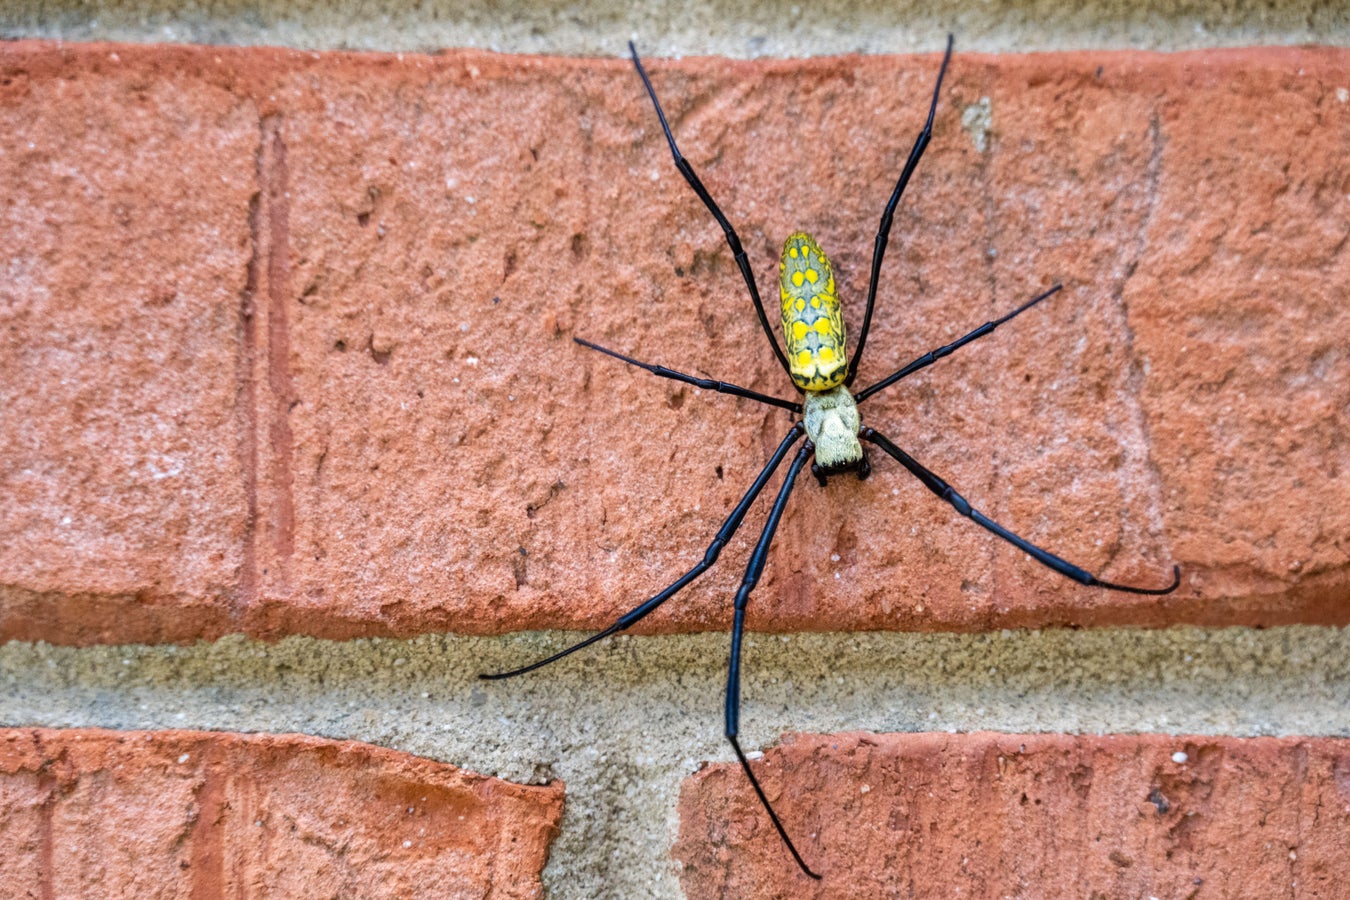 Giant Joro Spiders Are Coming: Here’s What to Expect (scientificamerican.com)